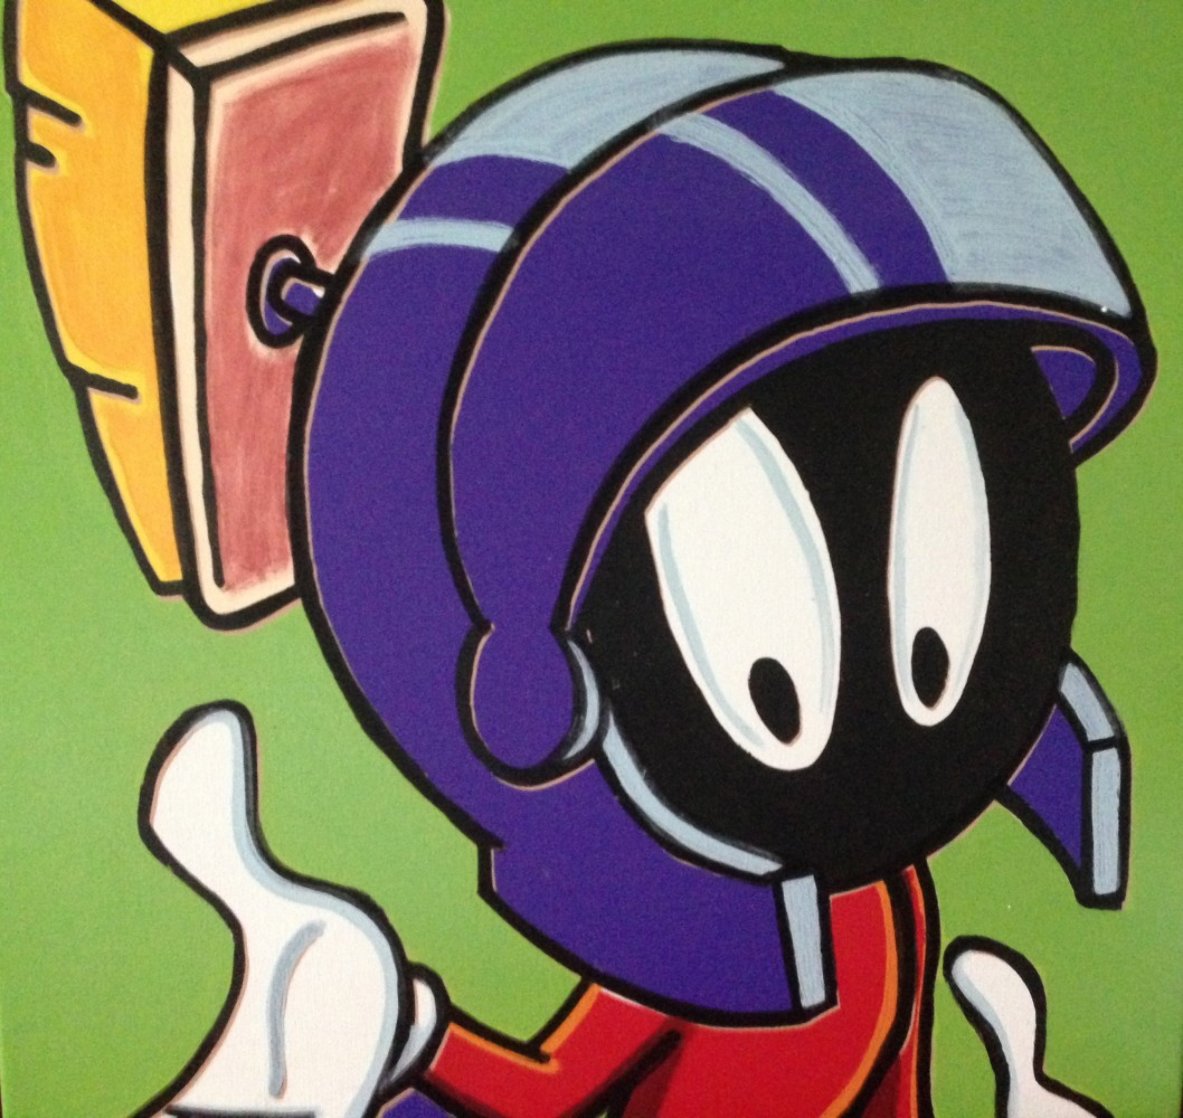 Marvin, The Martian 20x20 Limited Edition Print by Steve Kaufman